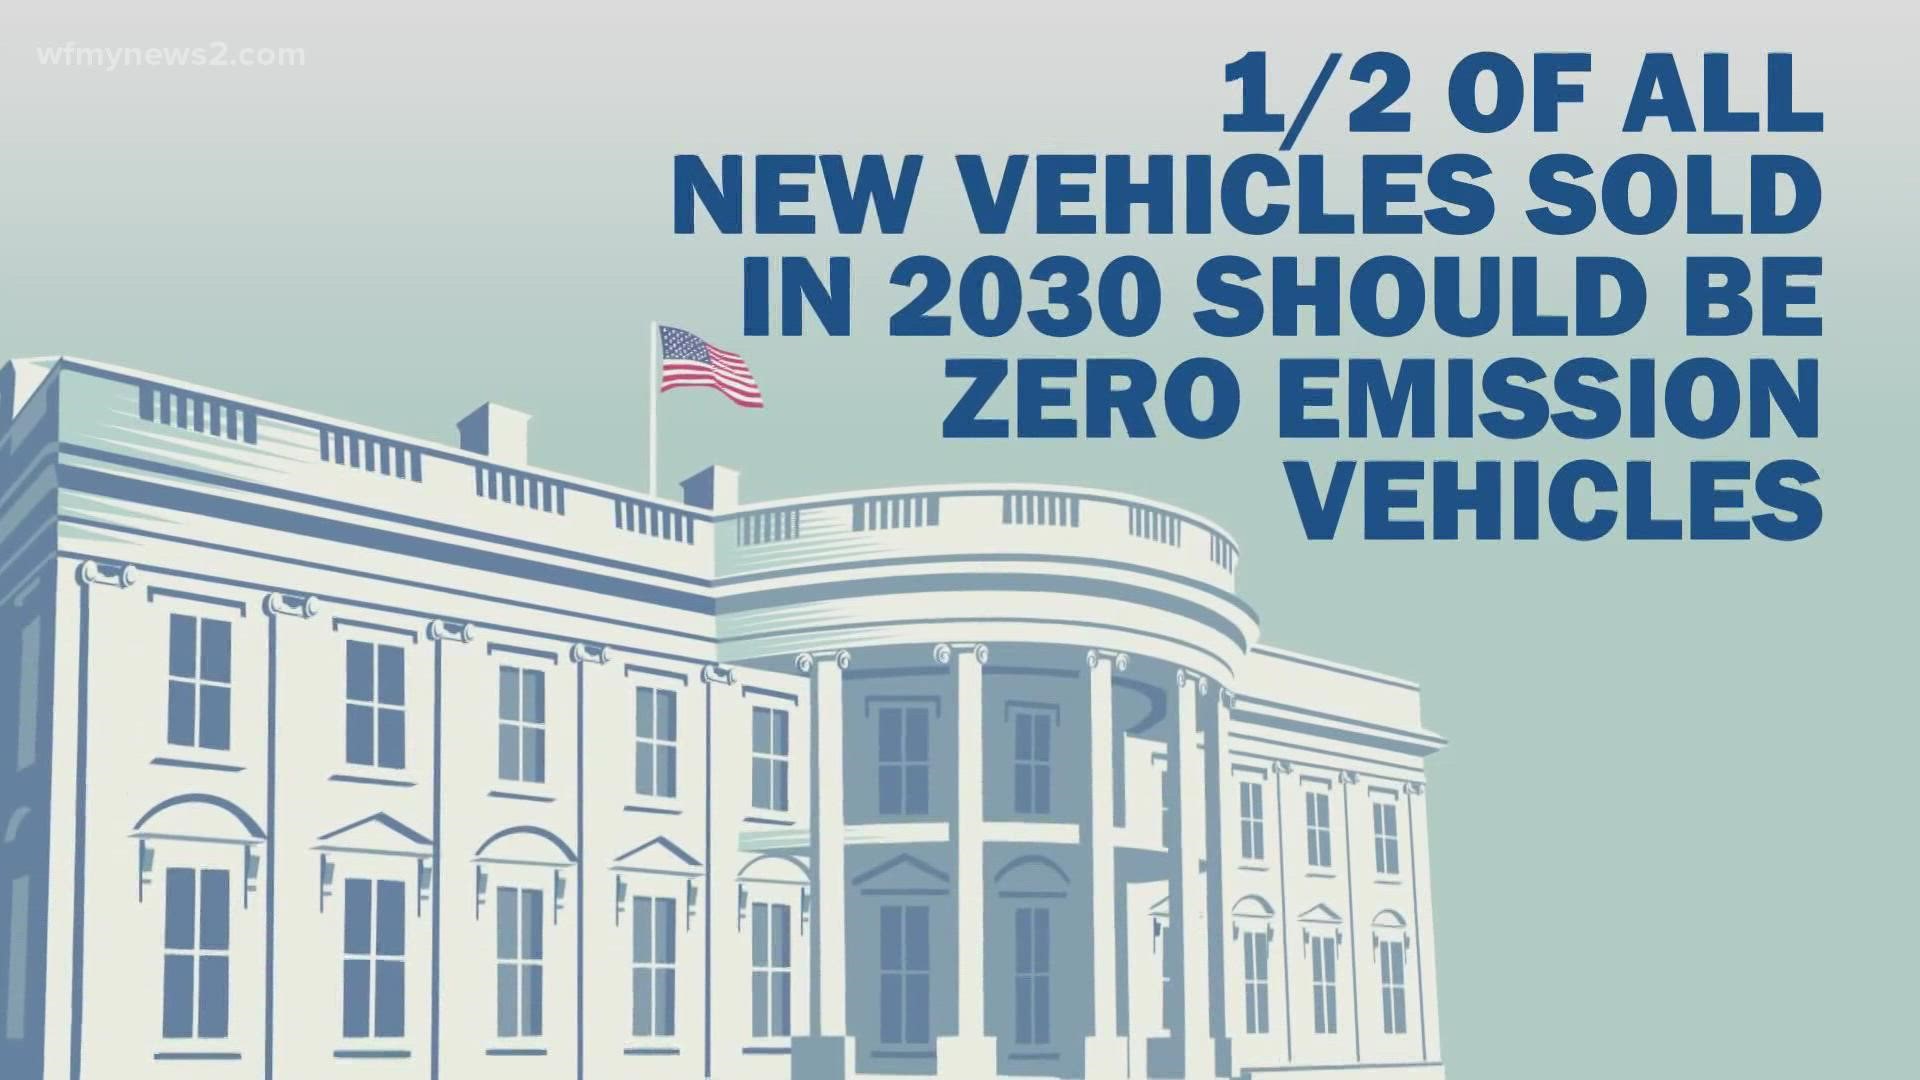 In an executive order, the president set the national goal of electric vehicles being half of all new vehicles sold by 2030.